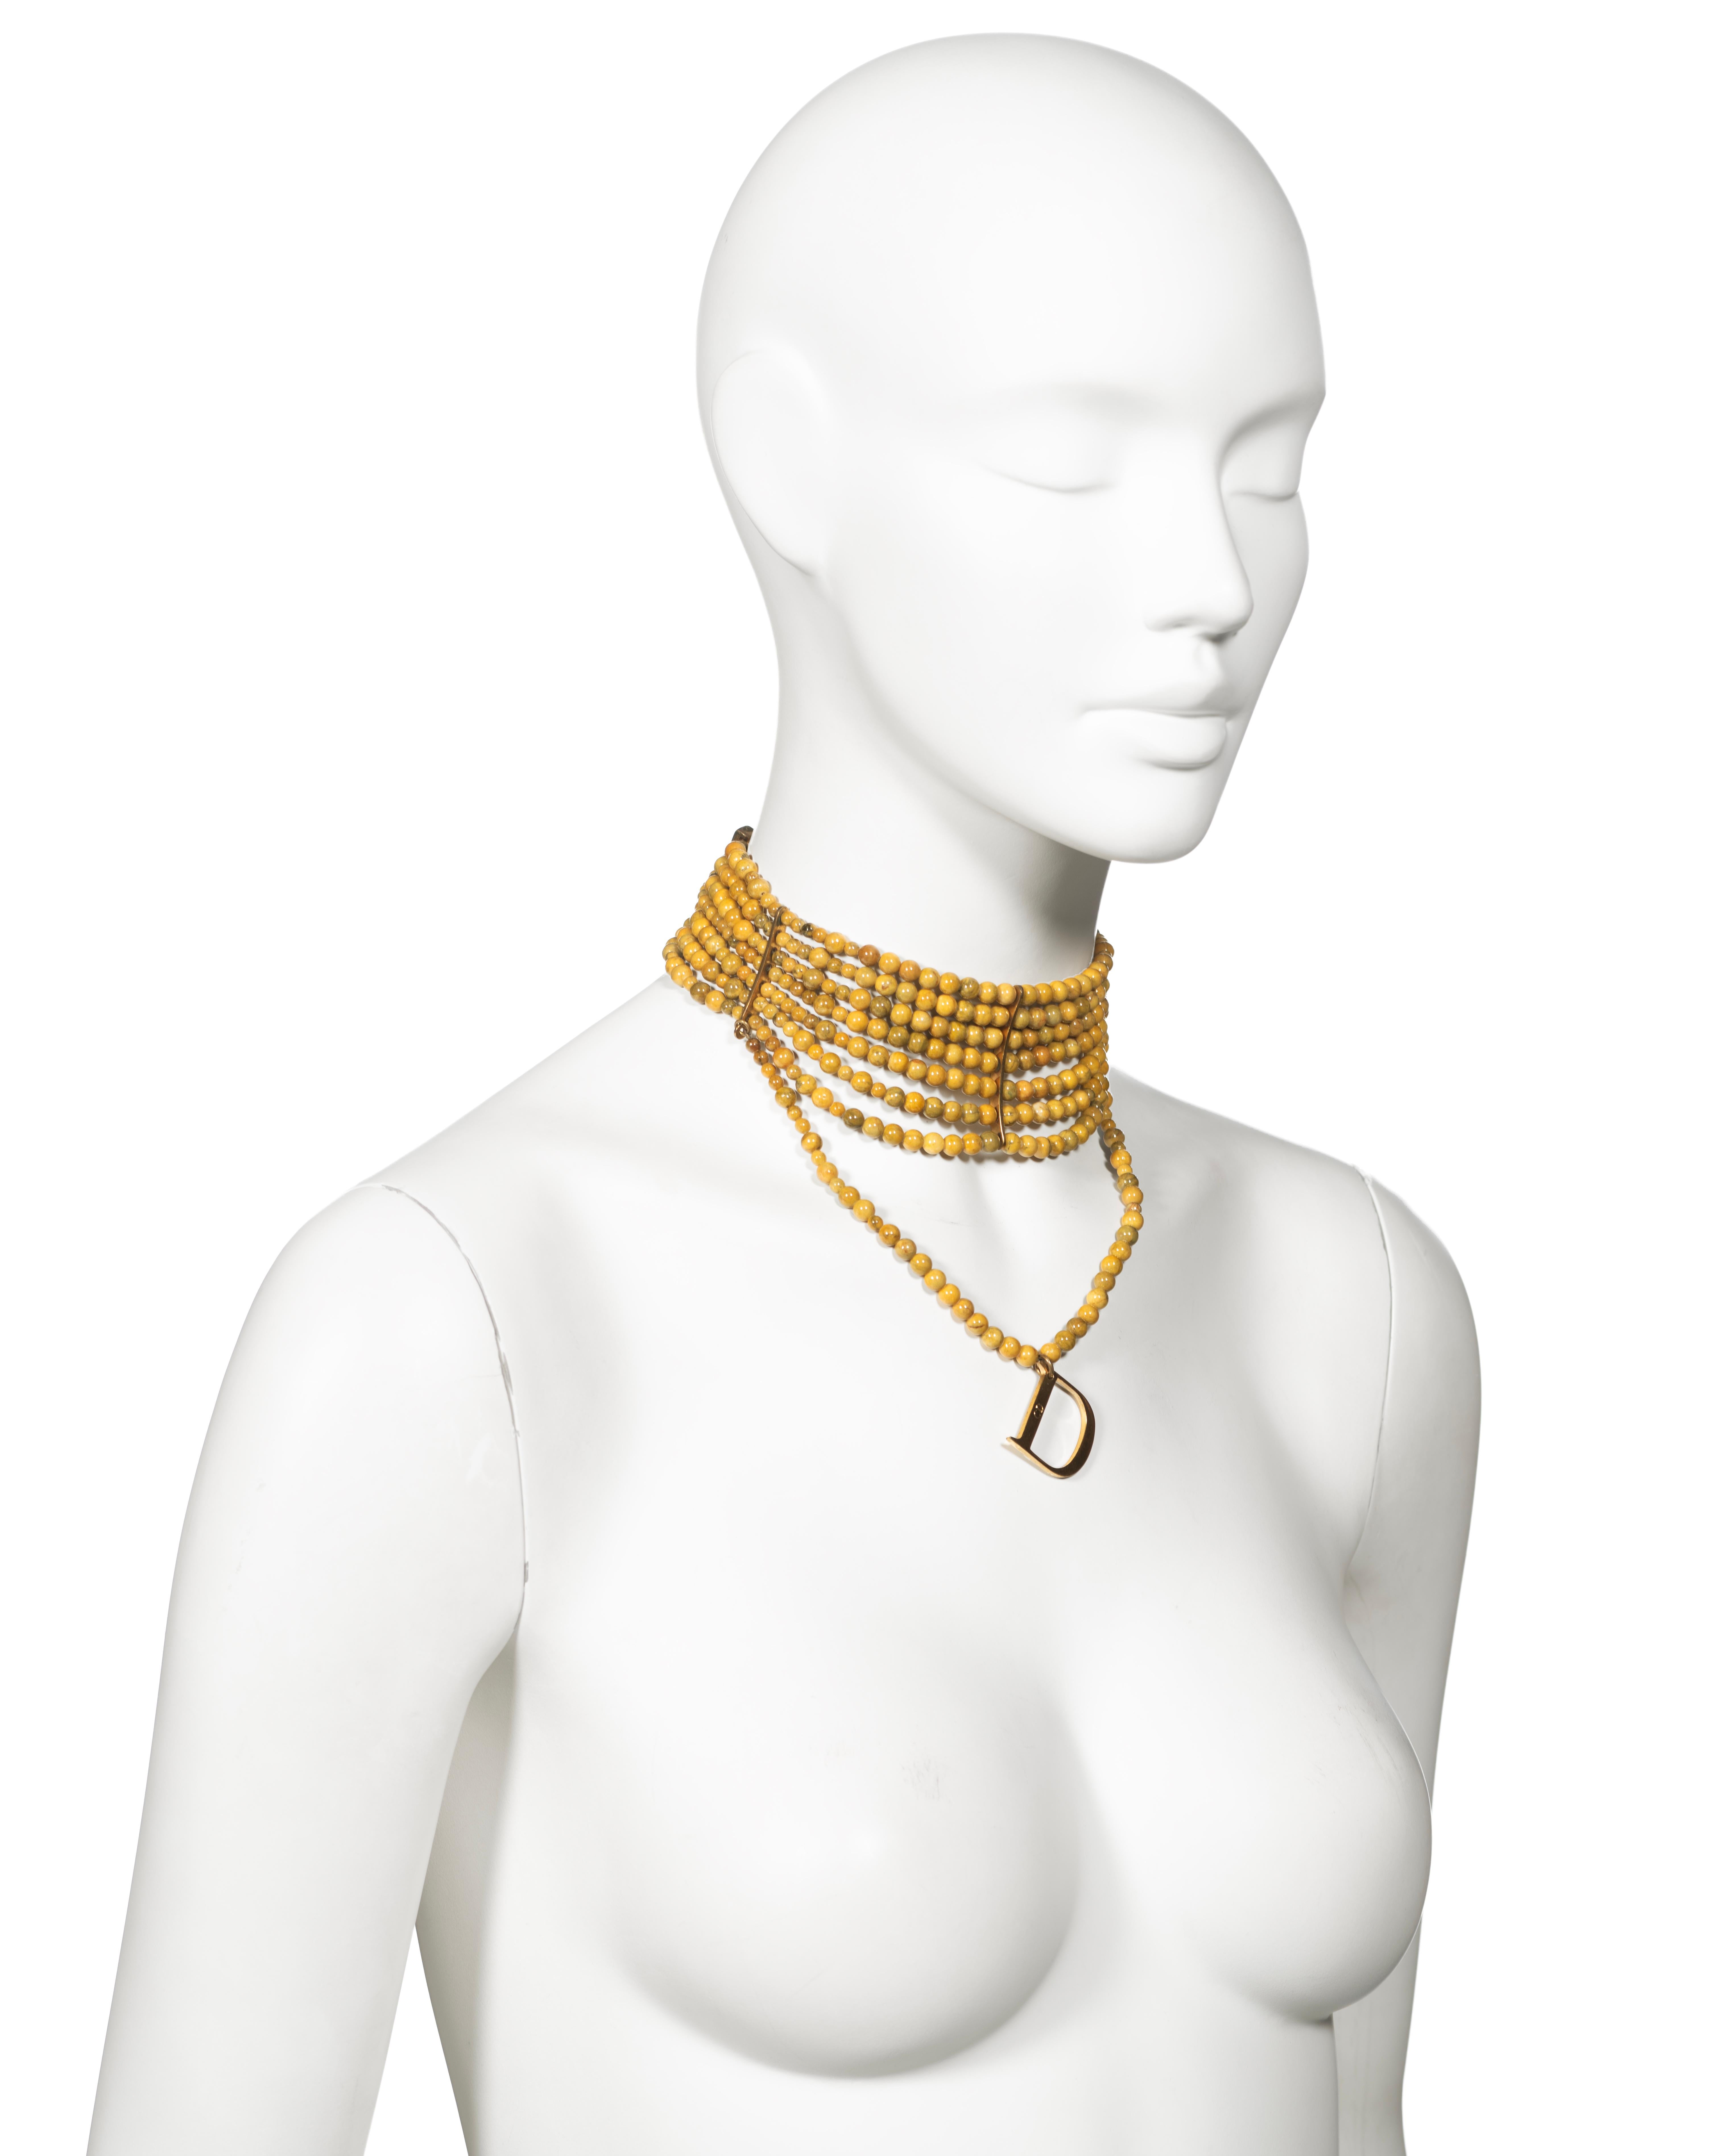 Christian Dior by John Galliano Marbled Glass Bead Choker Necklace, c. 1998 For Sale 5